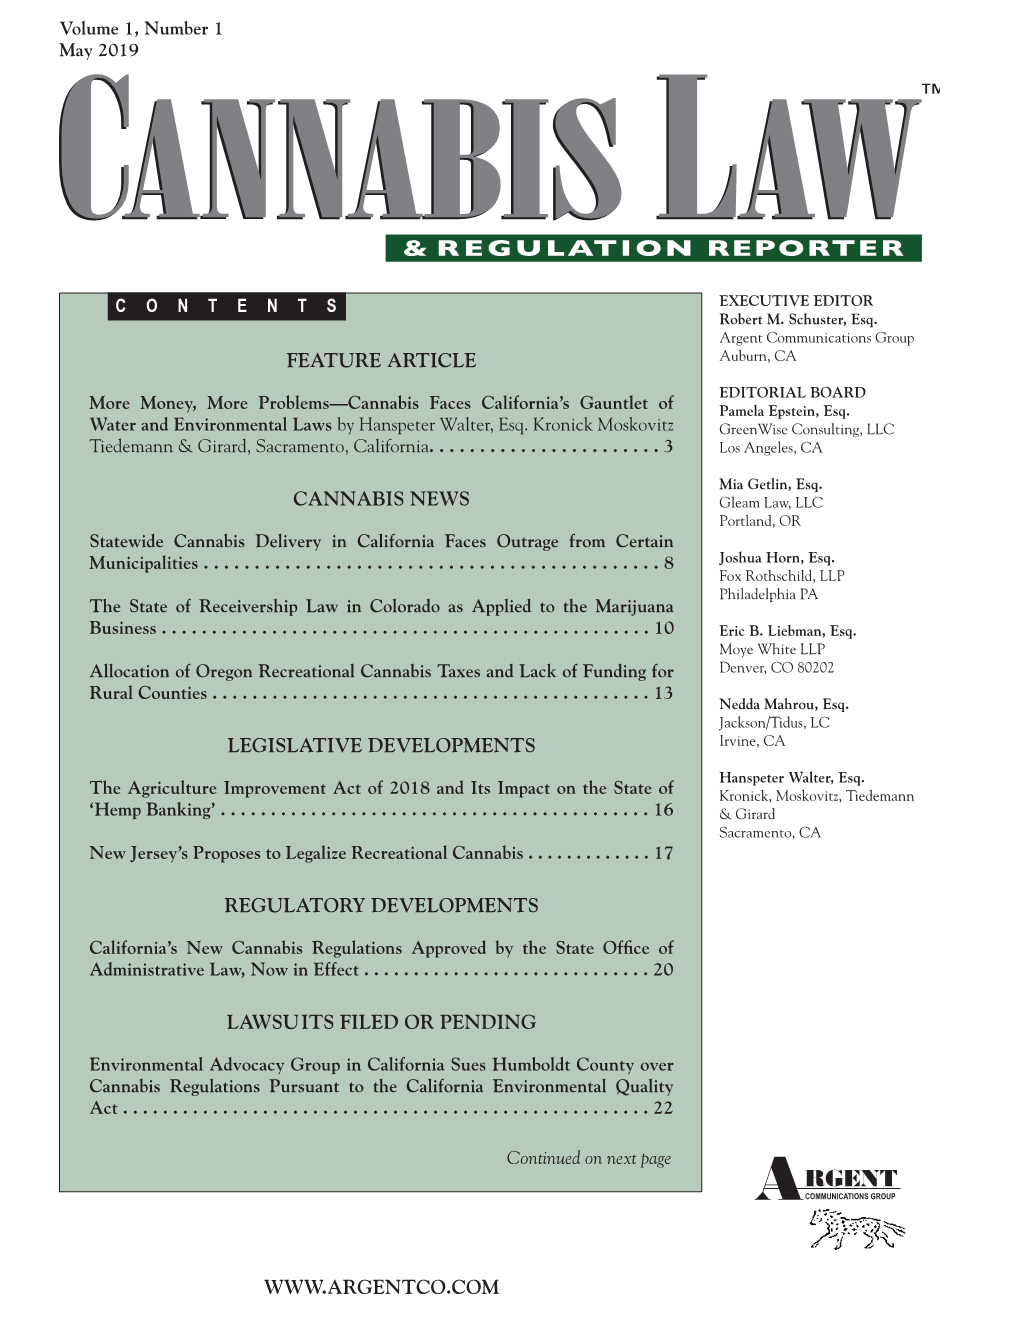 Argent Communications Group FEATURE ARTICLE Auburn, CA EDITORIAL BOARD More Money, More Problems—Cannabis Faces California’S Gauntlet of Pamela Epstein, Esq